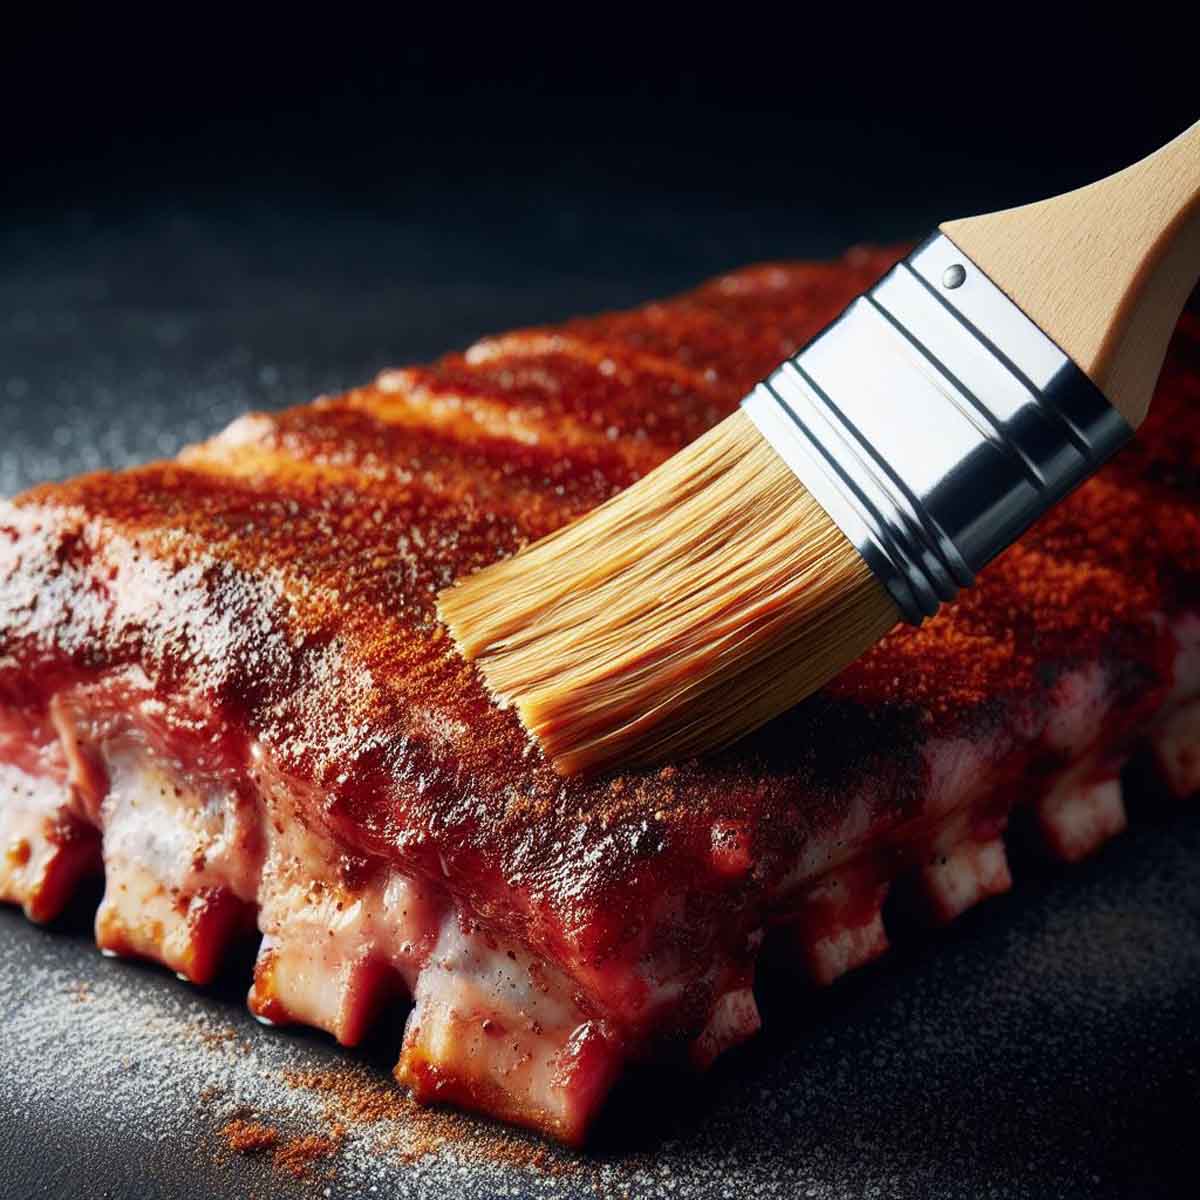 Brush applying a glossy marinade over the spice-coated surface of raw ribs.